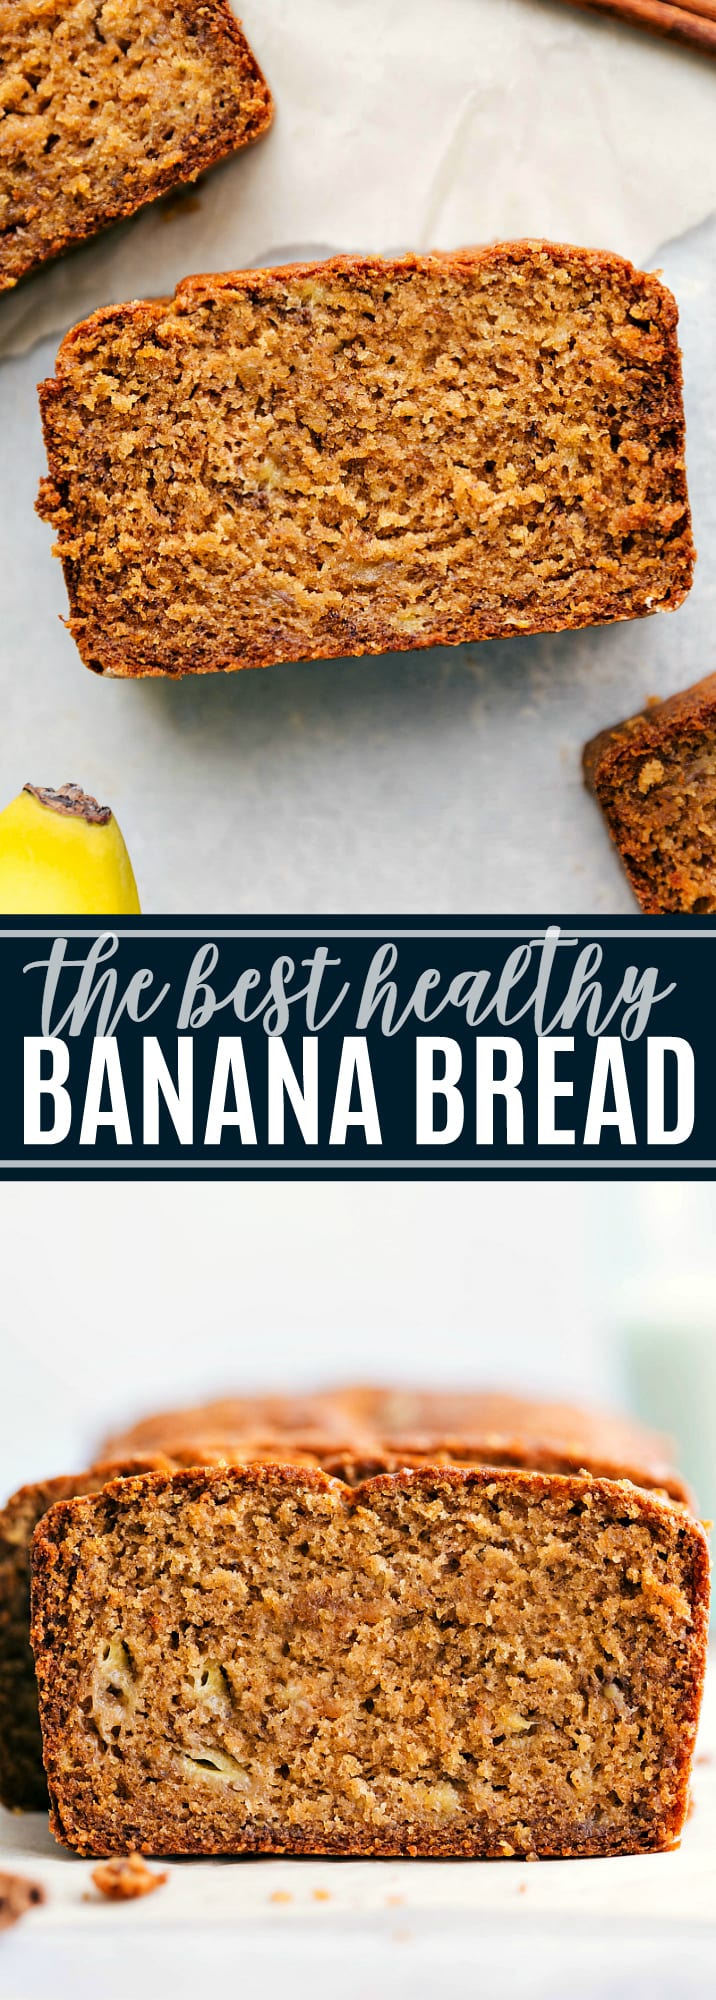 This is the best healthy banana bread is bursting with flavor and made with tons of healthy ingredient swaps. This healthy banana bread with yogurt can be made with or without chocolate chips and/or nuts! via chelseasmessyapron.com #healthy #banana #bread #easy #quick #calorie #kidfriendly #best #ever #recipe #greek #yogurt #delicious